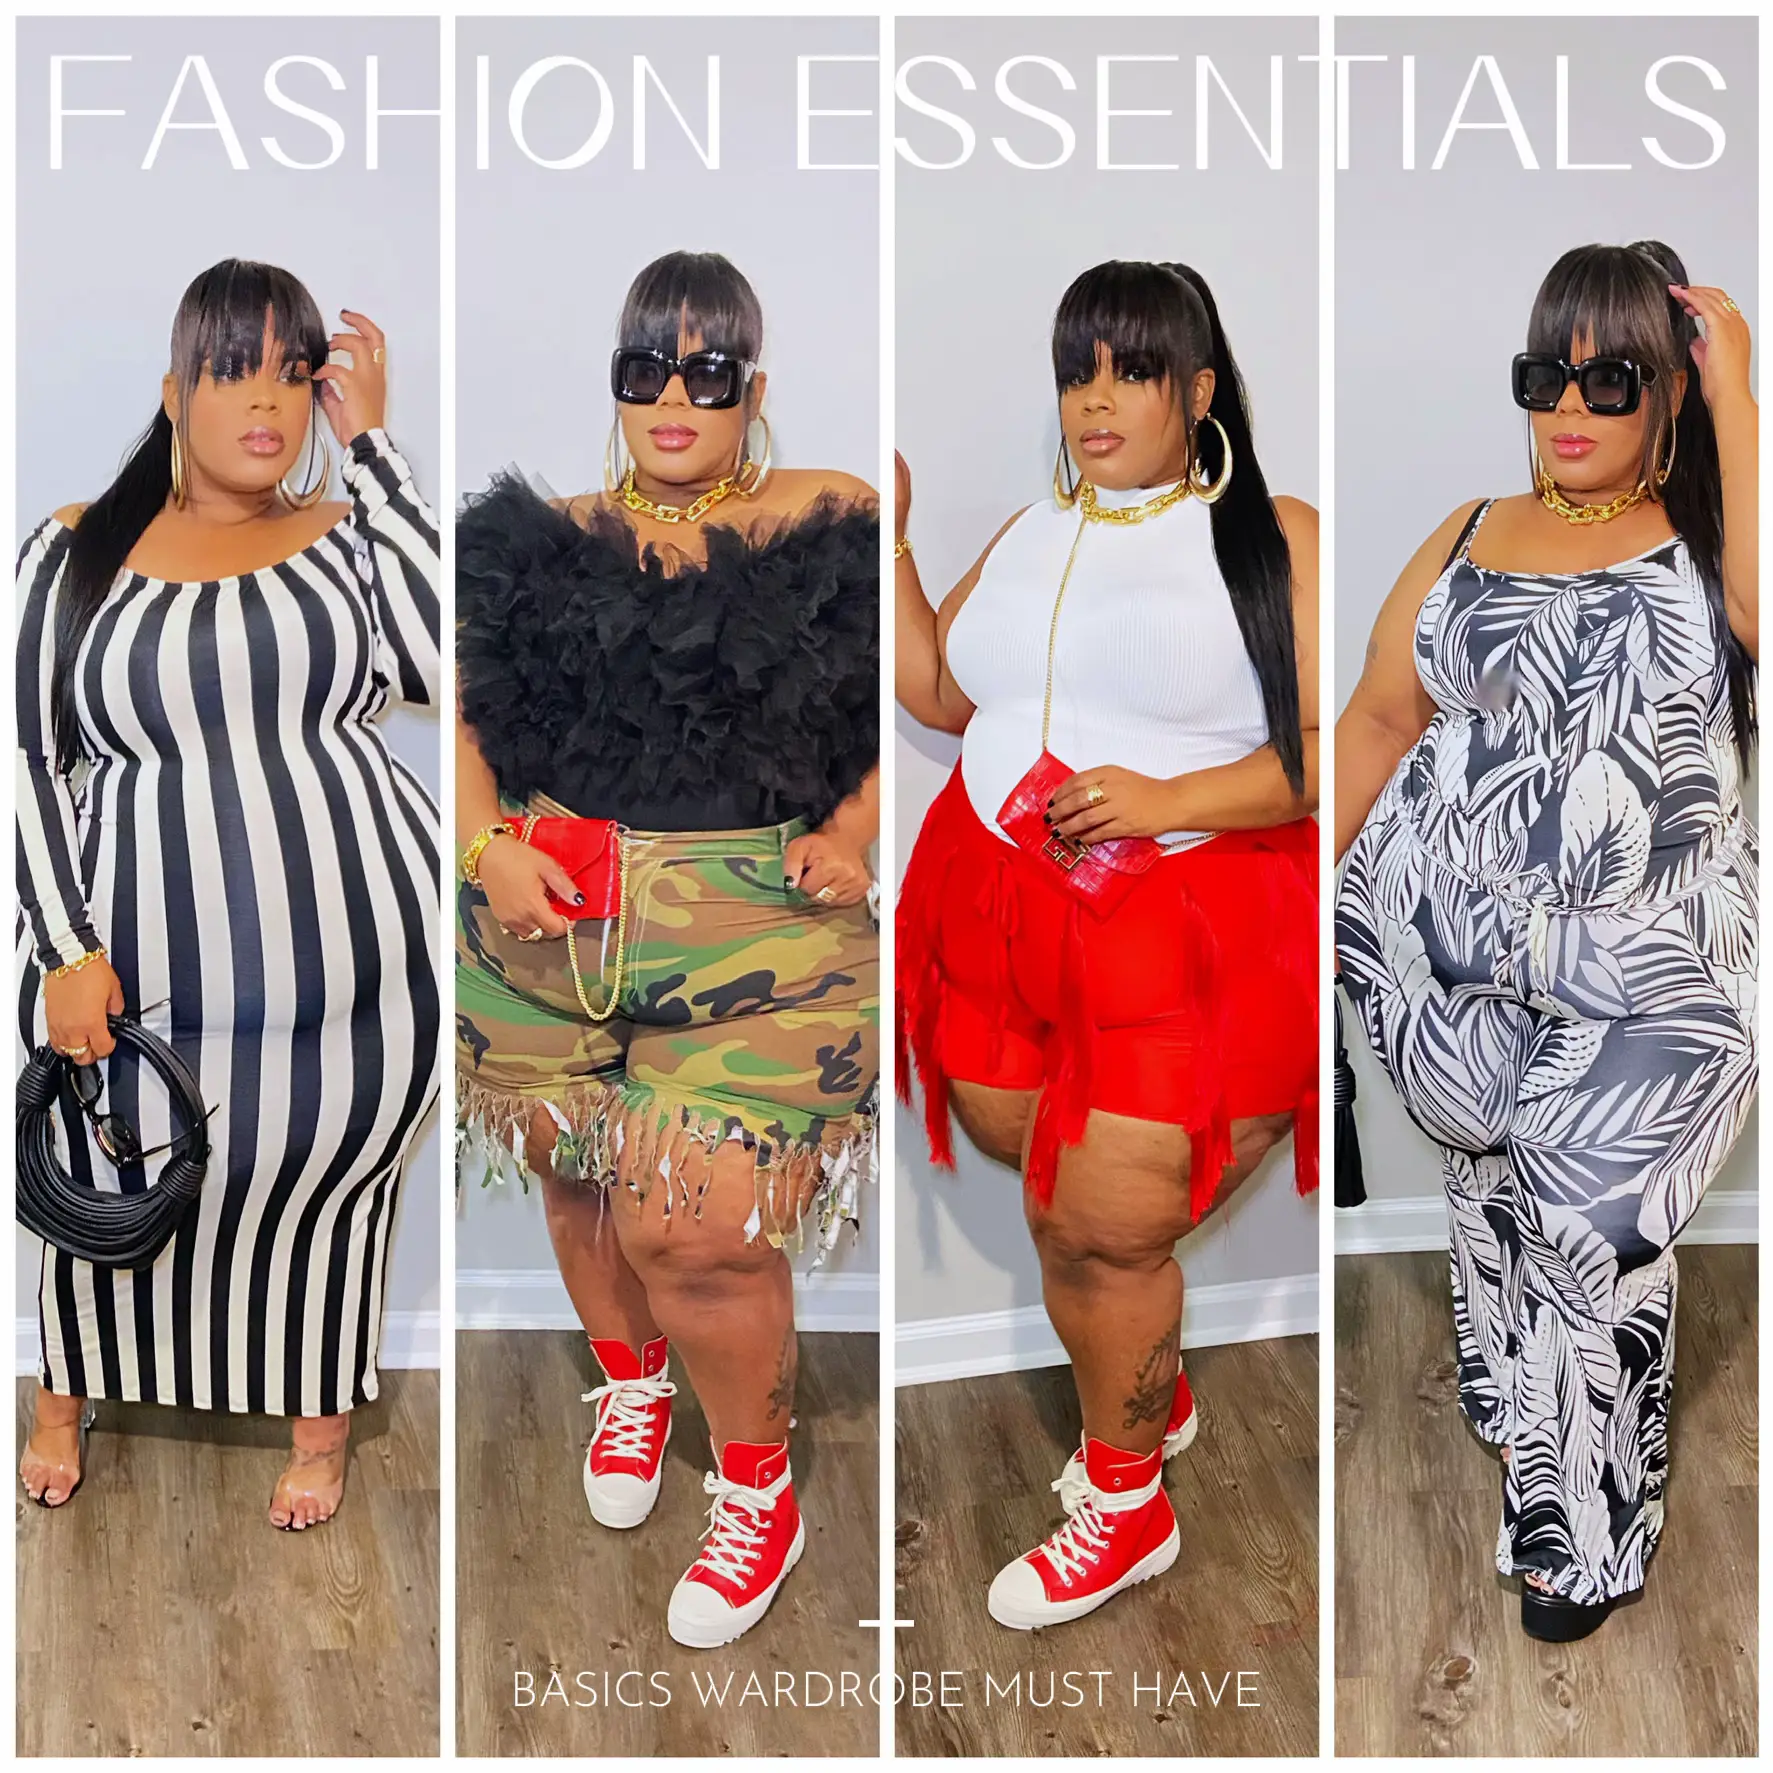 DESTROYED - The Sunday Slay  Plus Size Ripped Jeans Fashion Lookbook 